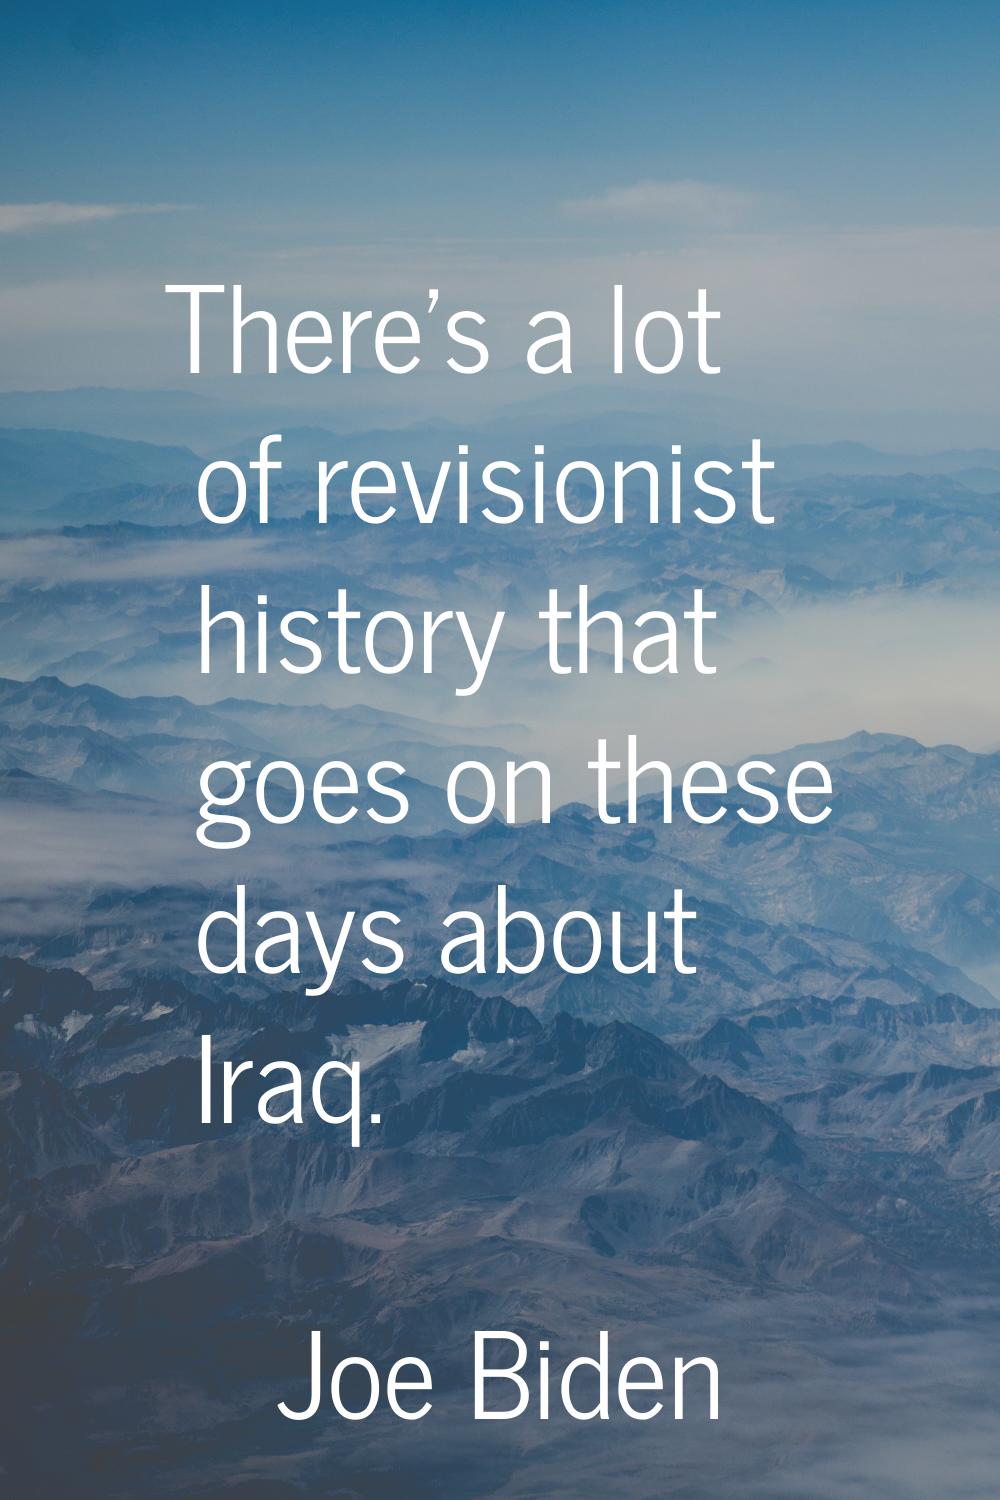 There's a lot of revisionist history that goes on these days about Iraq.